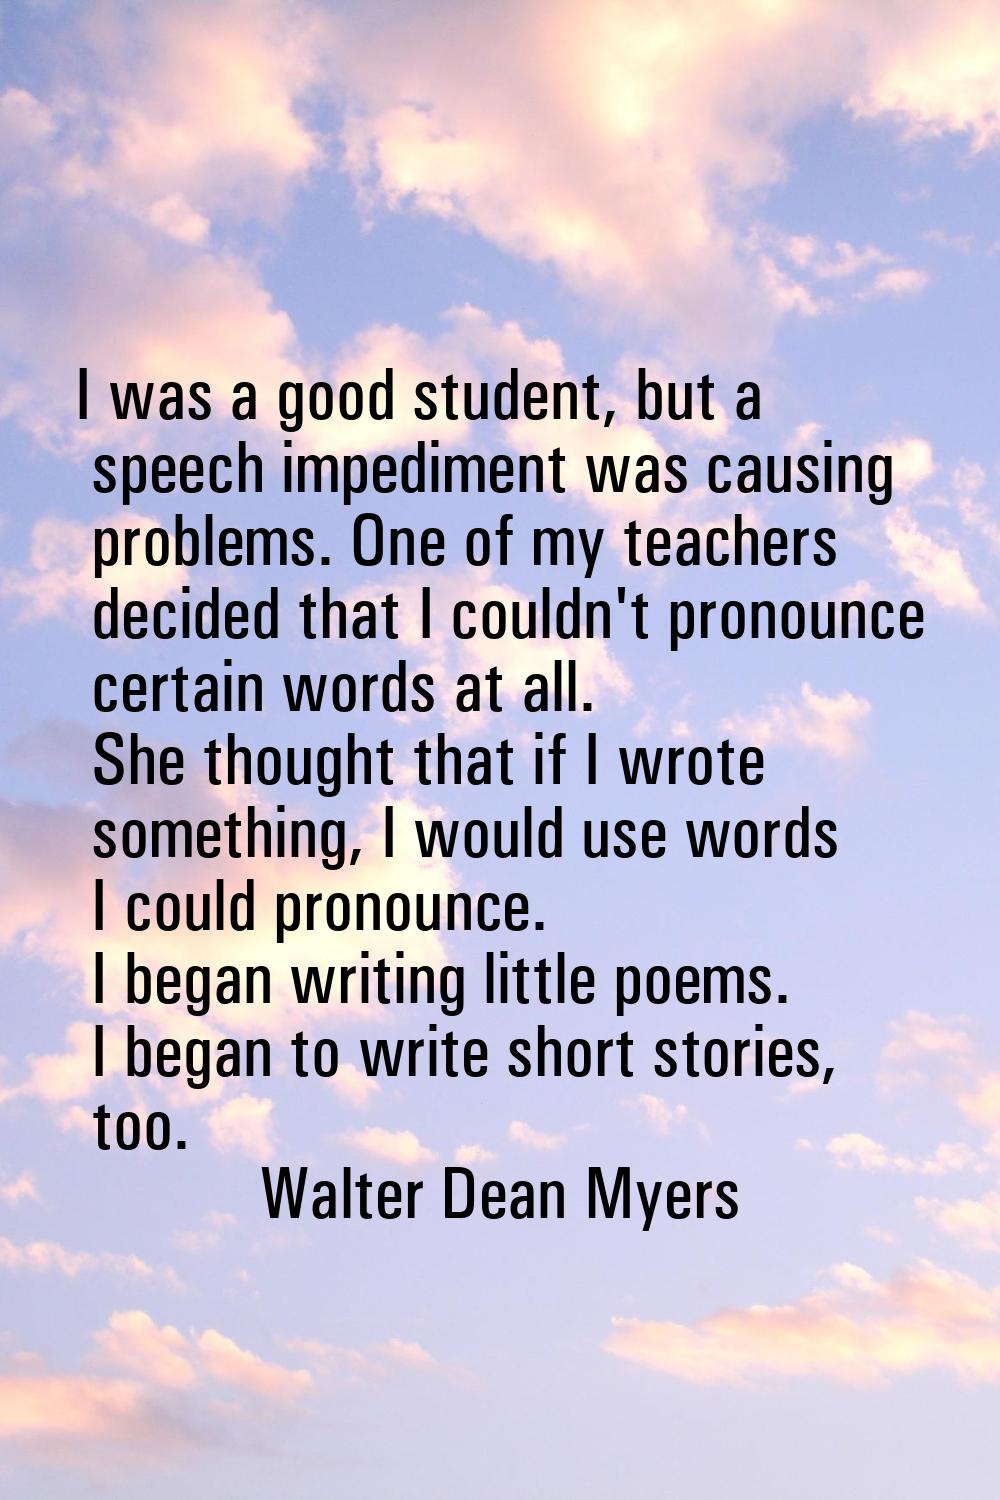 I was a good student, but a speech impediment was causing problems. One of my teachers decided that